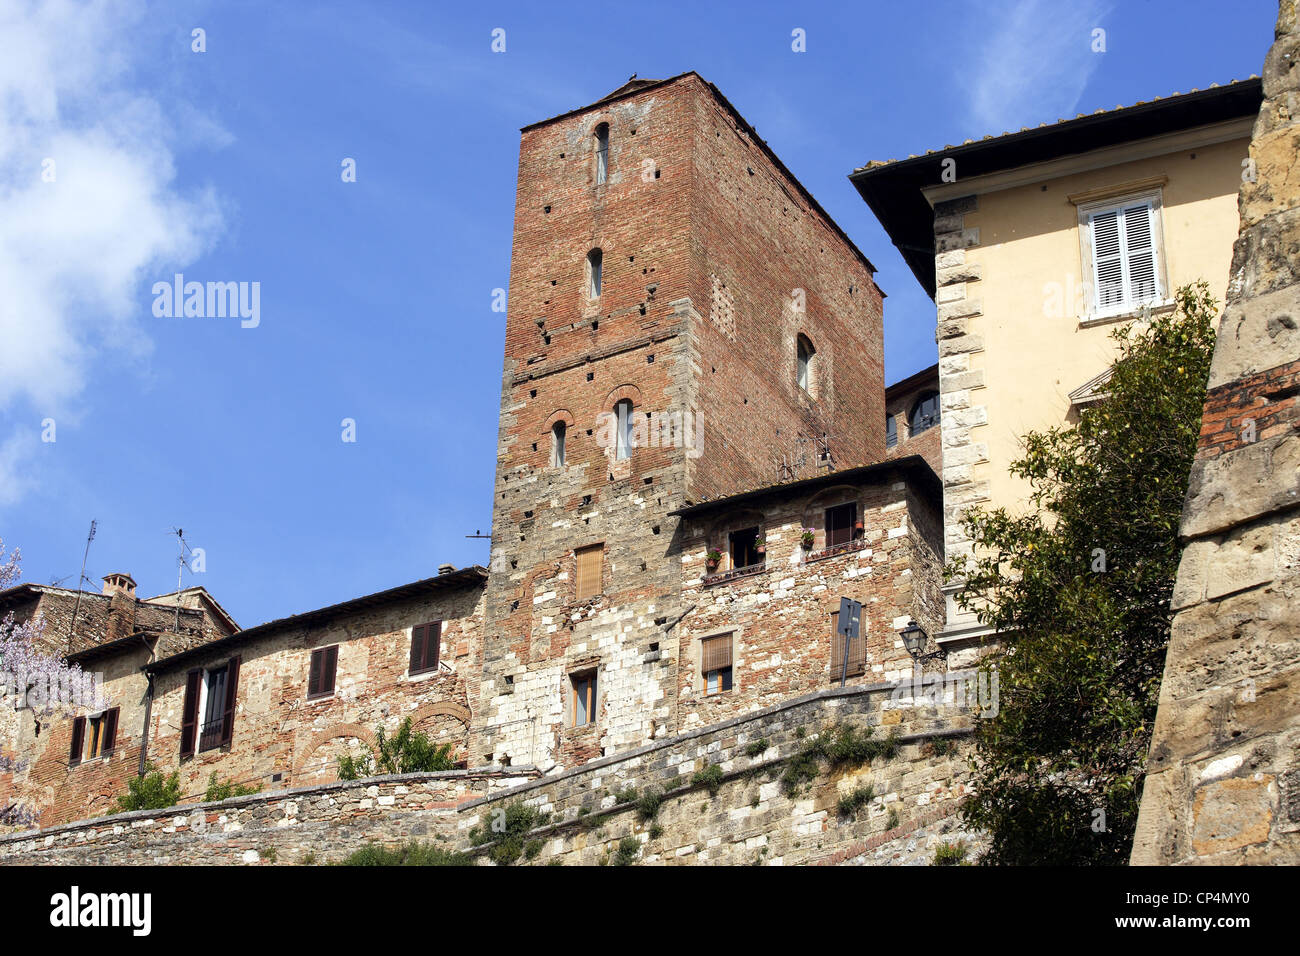 Arnolfo di Cambio's tower house. Italy, Tuscany Region, Colle Val d'Elsa (Si). Stock Photo